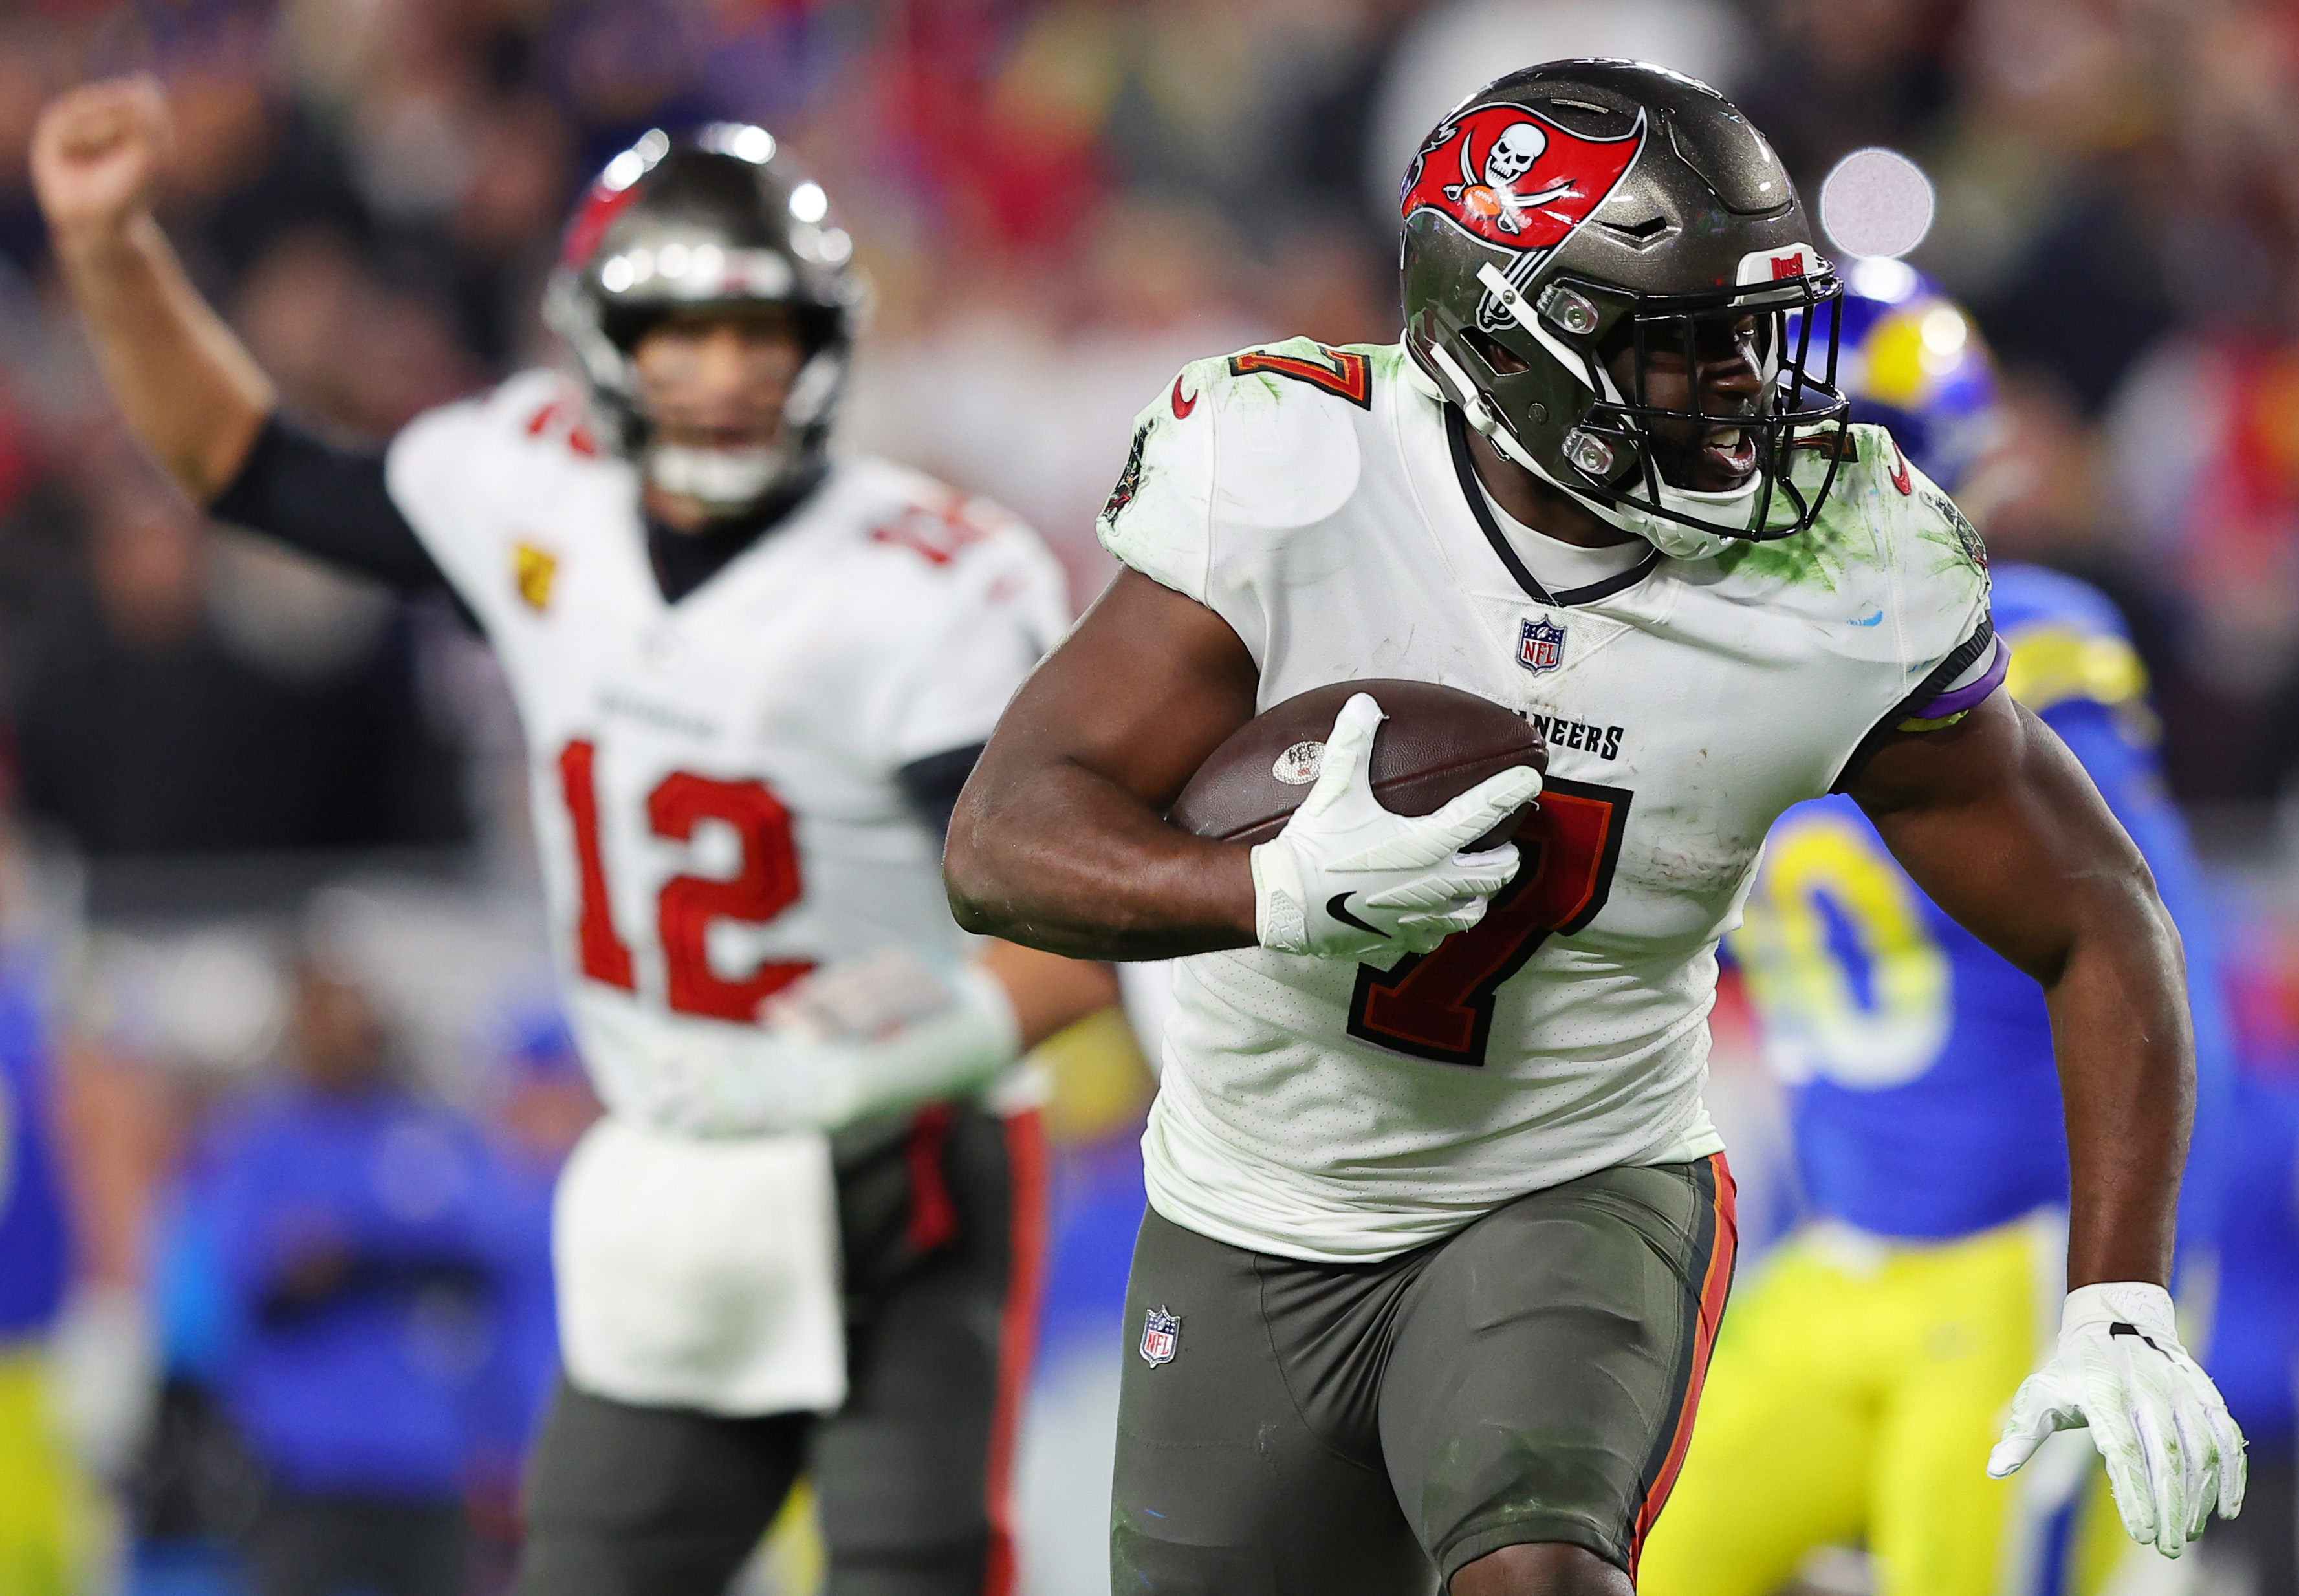 &nbsp;Leonard Fournette #7 of the Tampa Bay Buccaneers runs for a touchdown in the fourth quarter against the Los Angeles Rams in the NFC Divisional Playoff game at Raymond James Stadium on January 23, 2022 in Tampa, Florida.